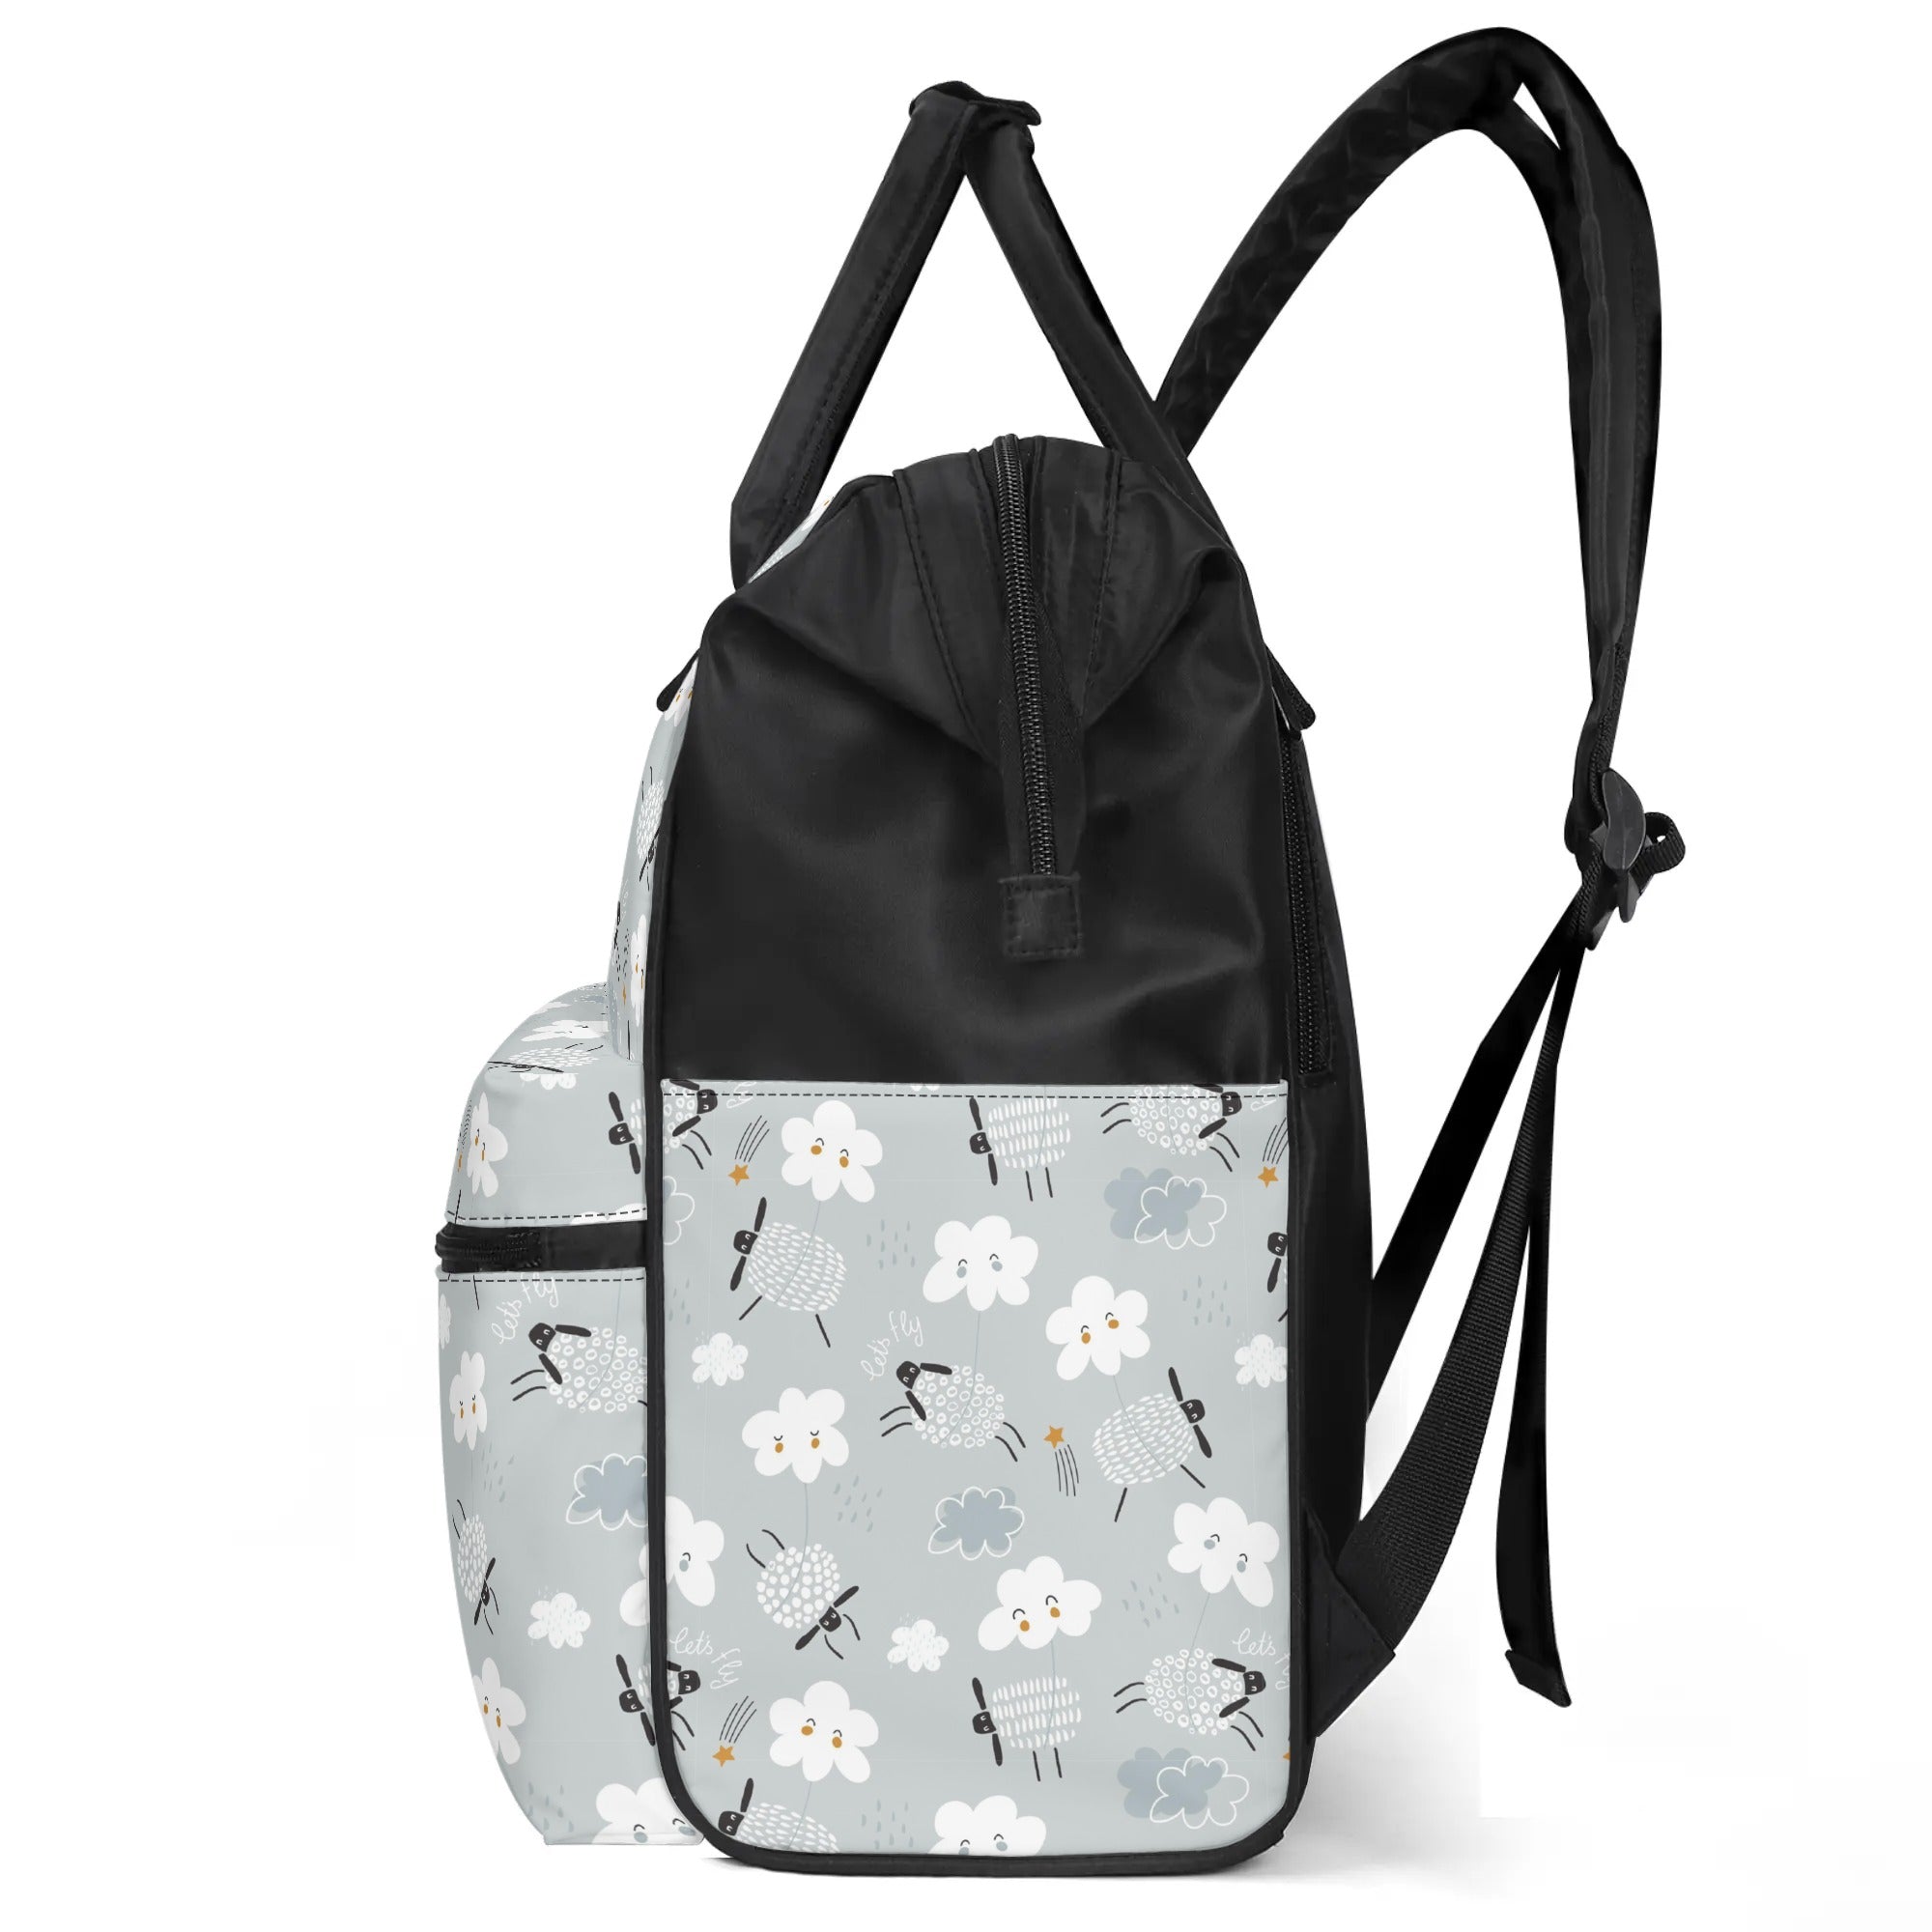 Large Capacity Diaper Backpack - Counting Sheep